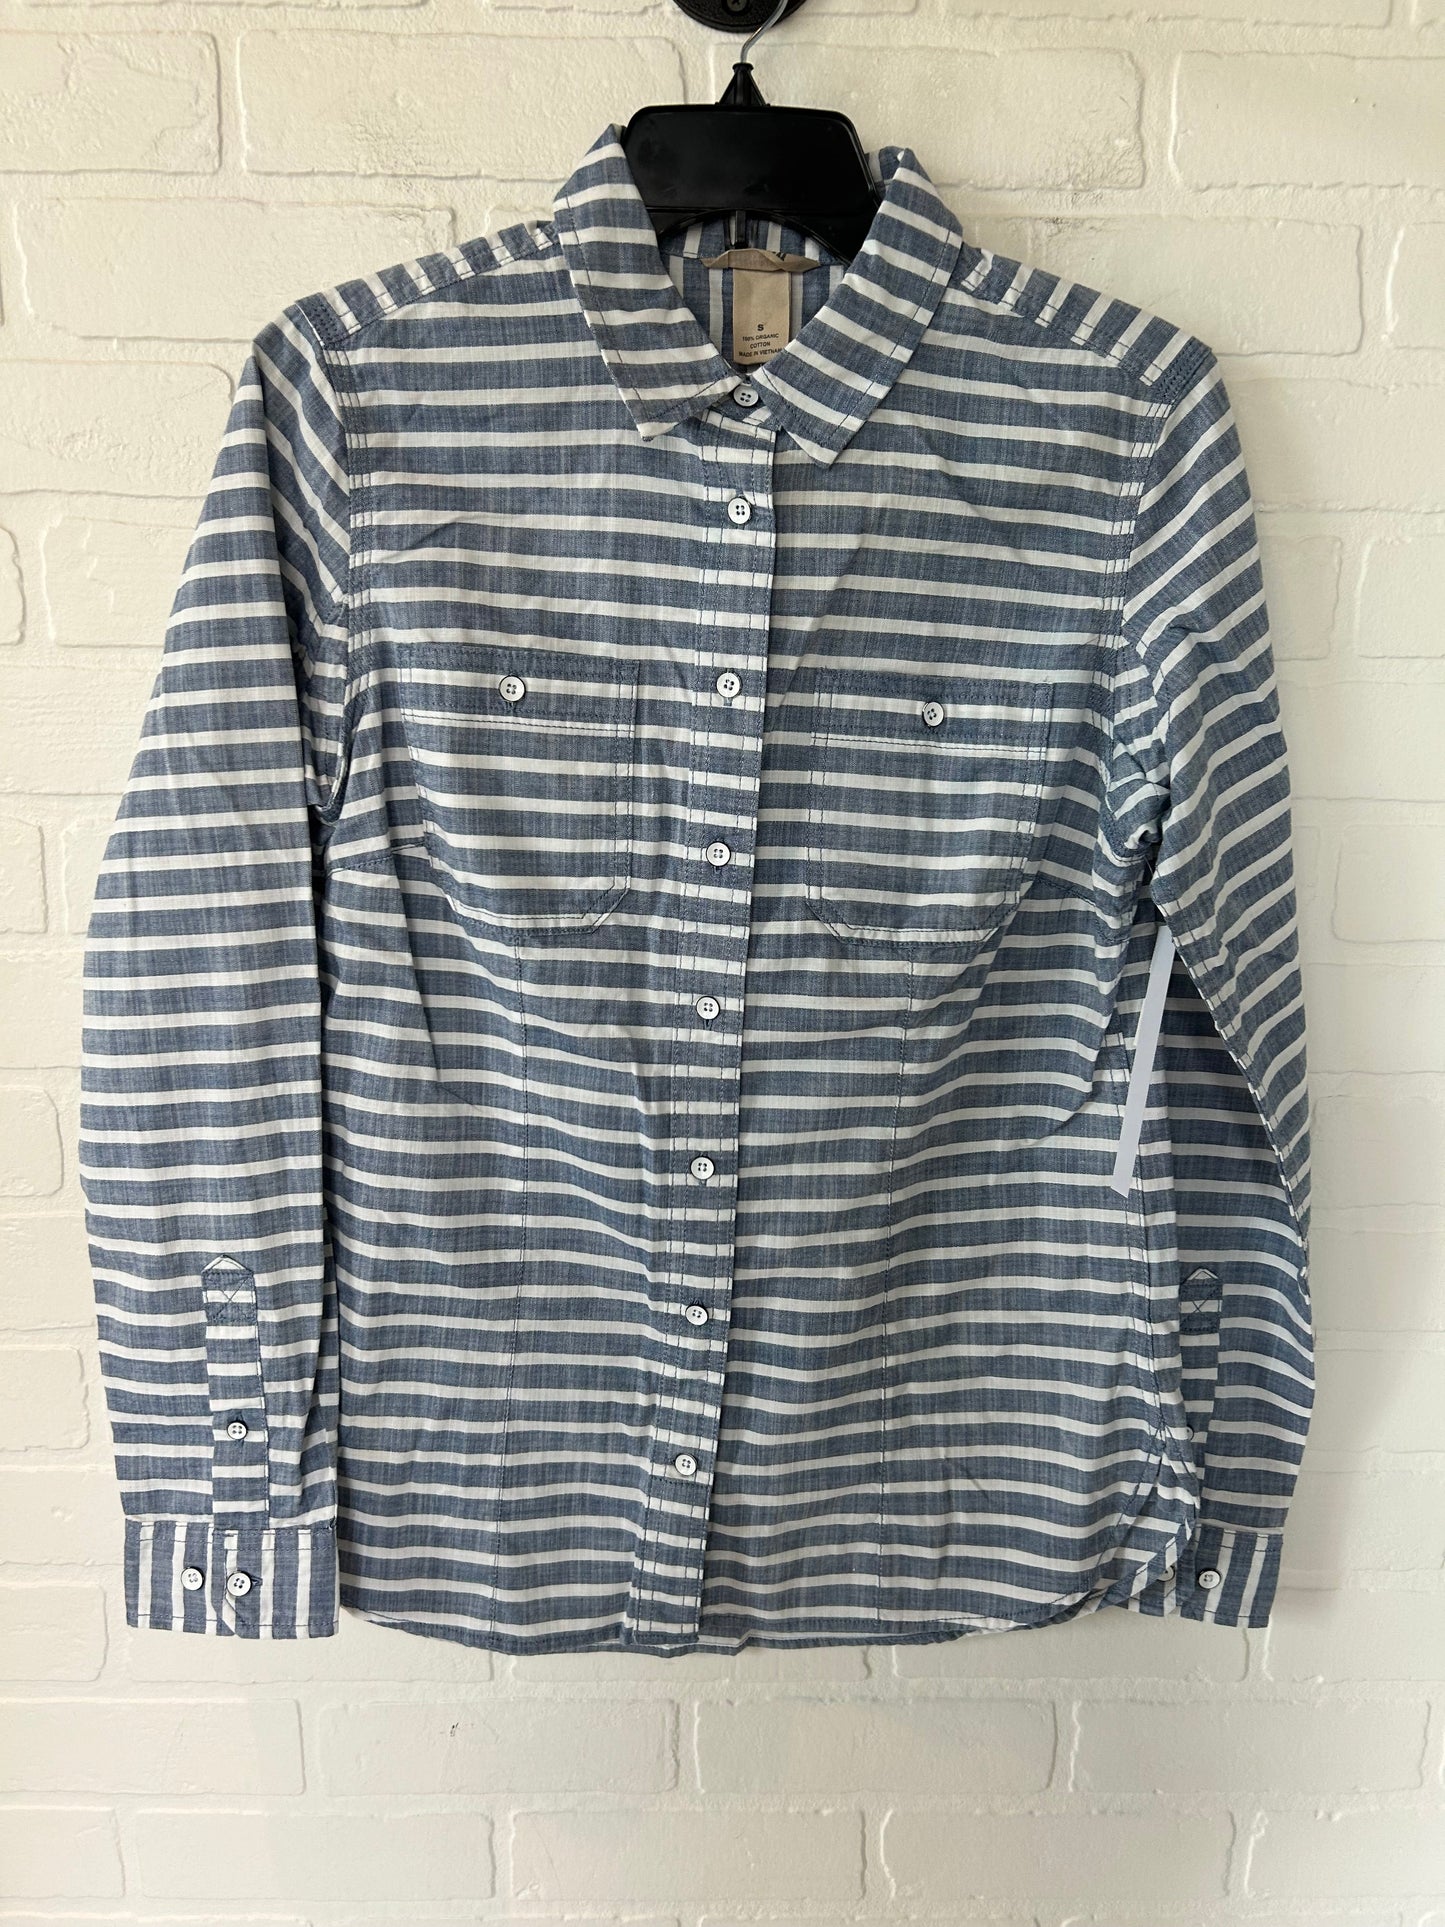 Blue & White Top Long Sleeve Duluth Trading, Size S